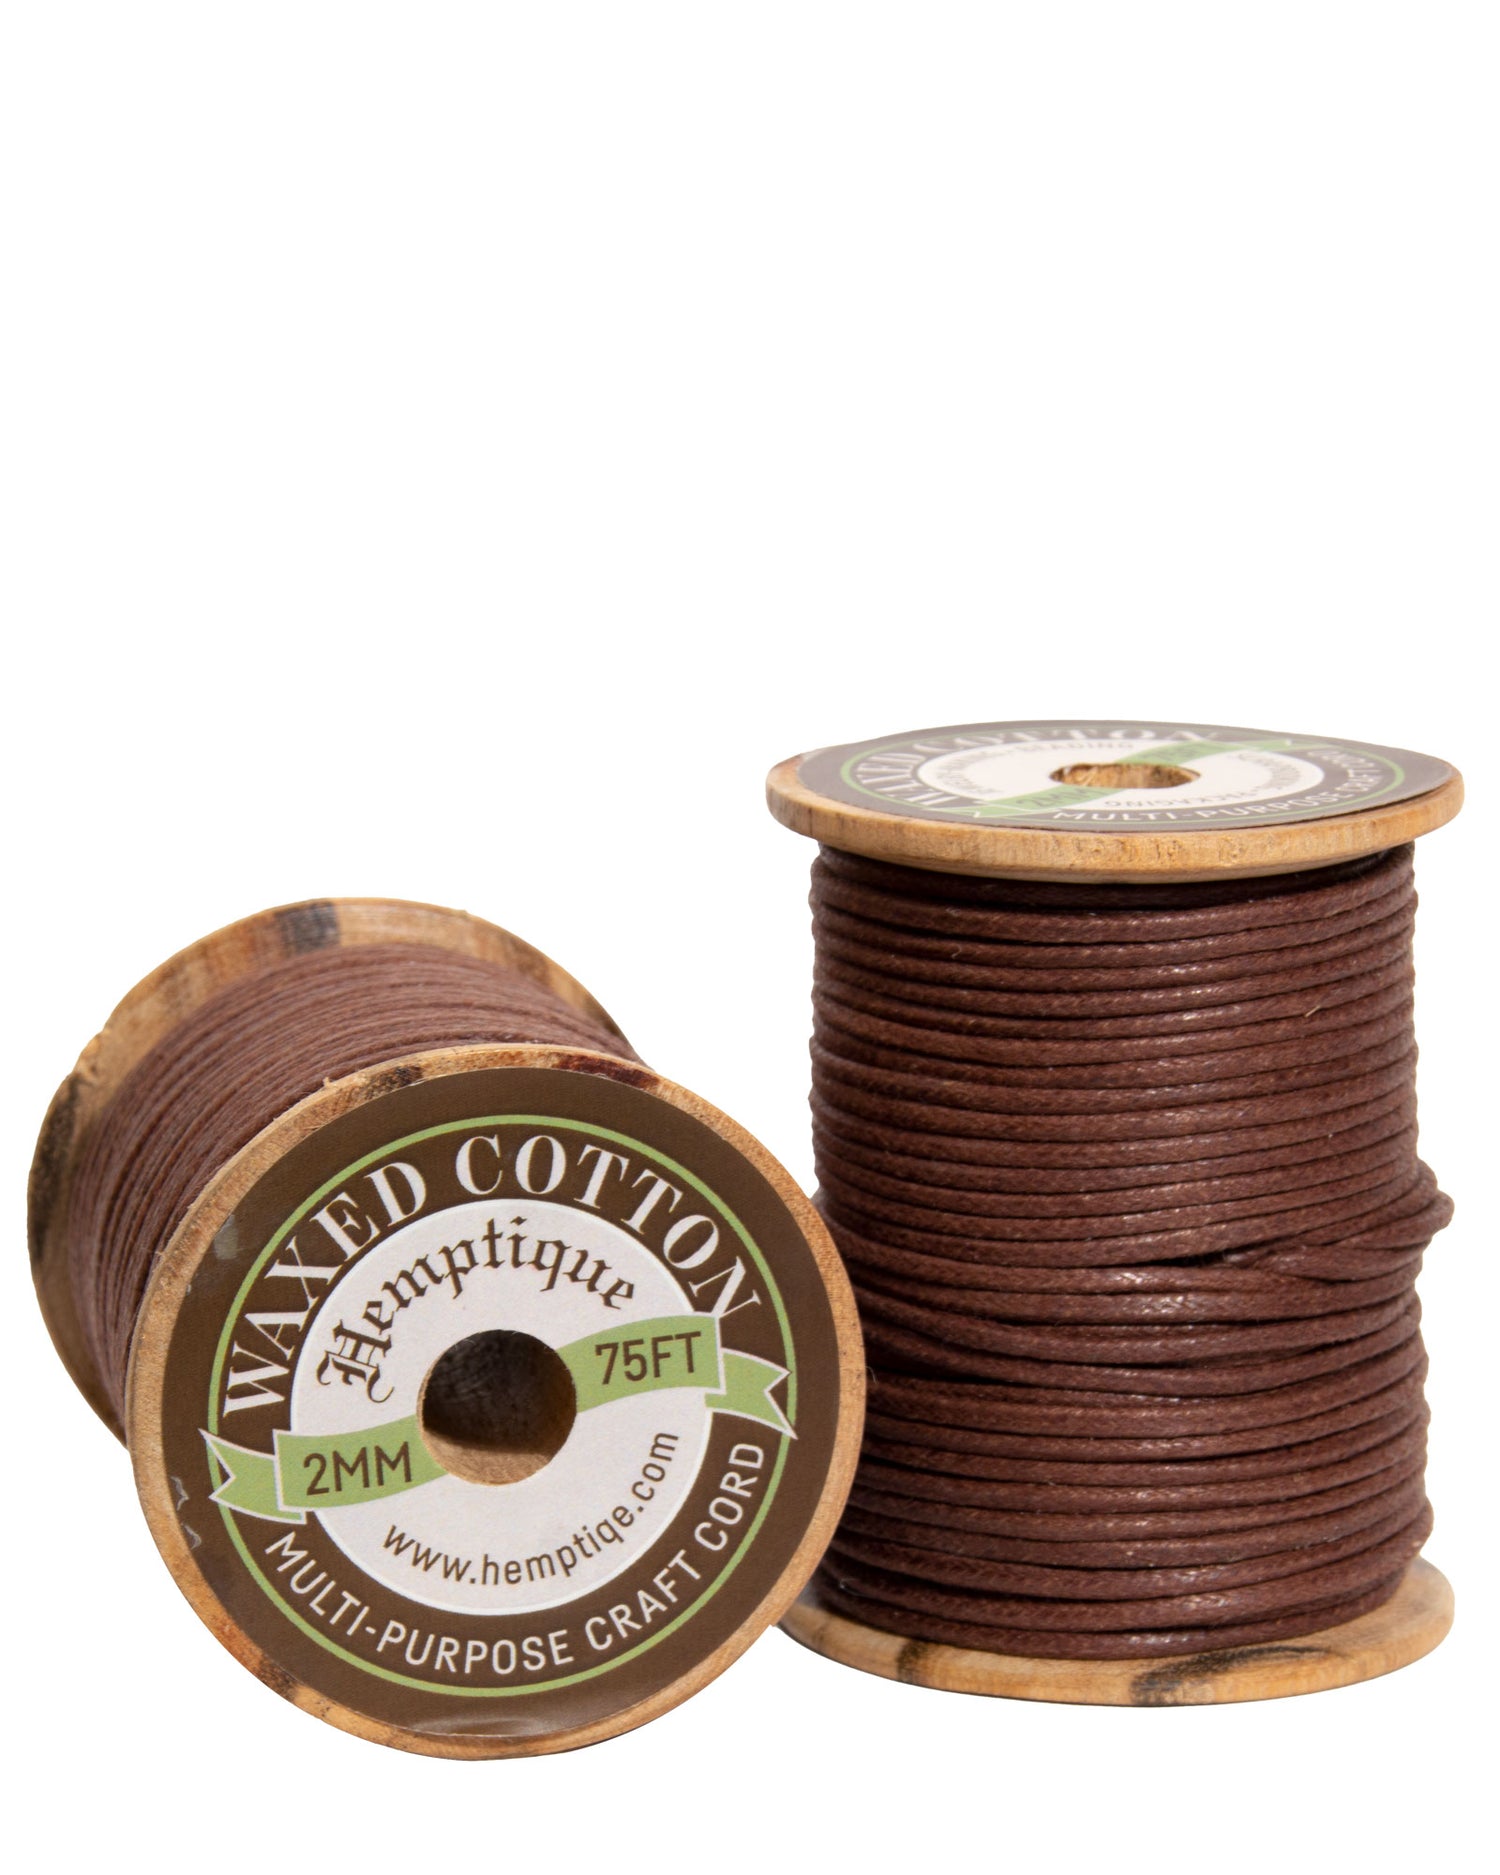 2mm Brown Cotton Cord on Wood Spool